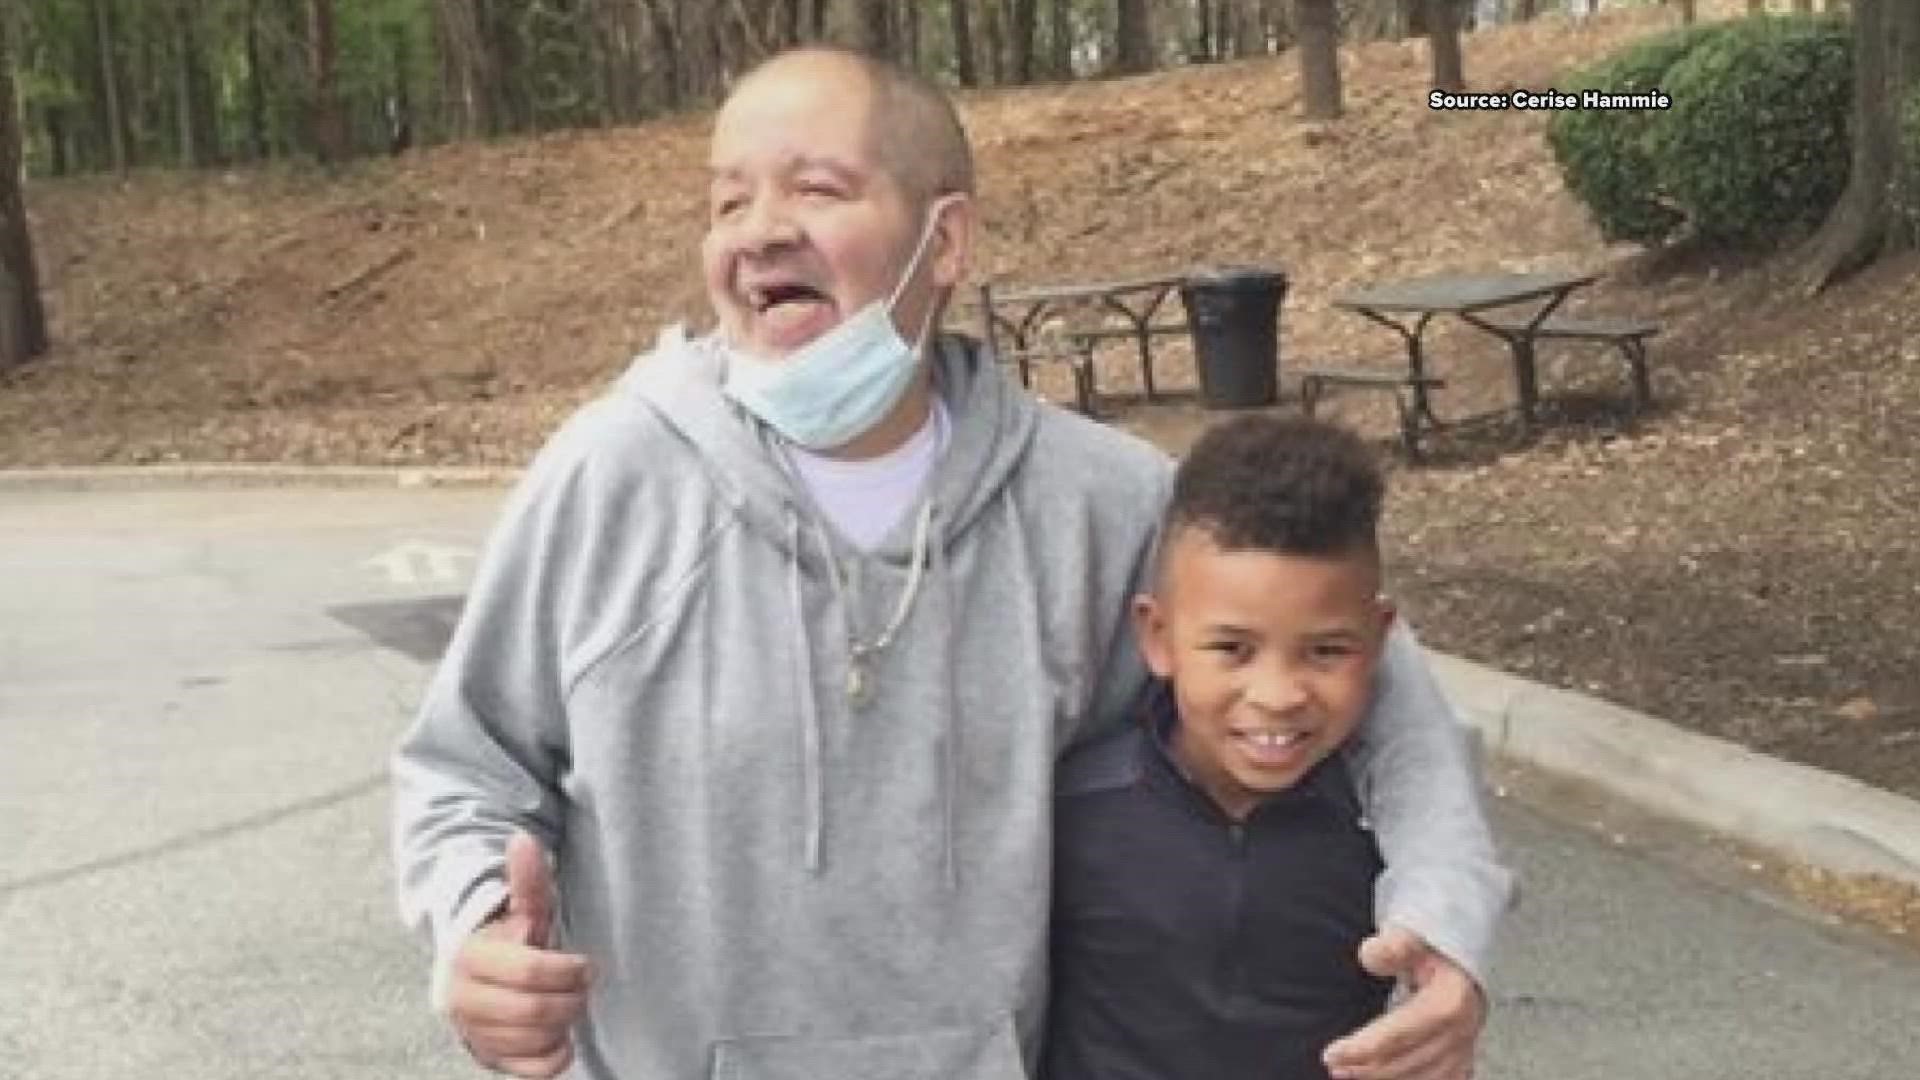 An 8-year-old is being hailed as a hero after rushing into action to save his grandfather from drowning.